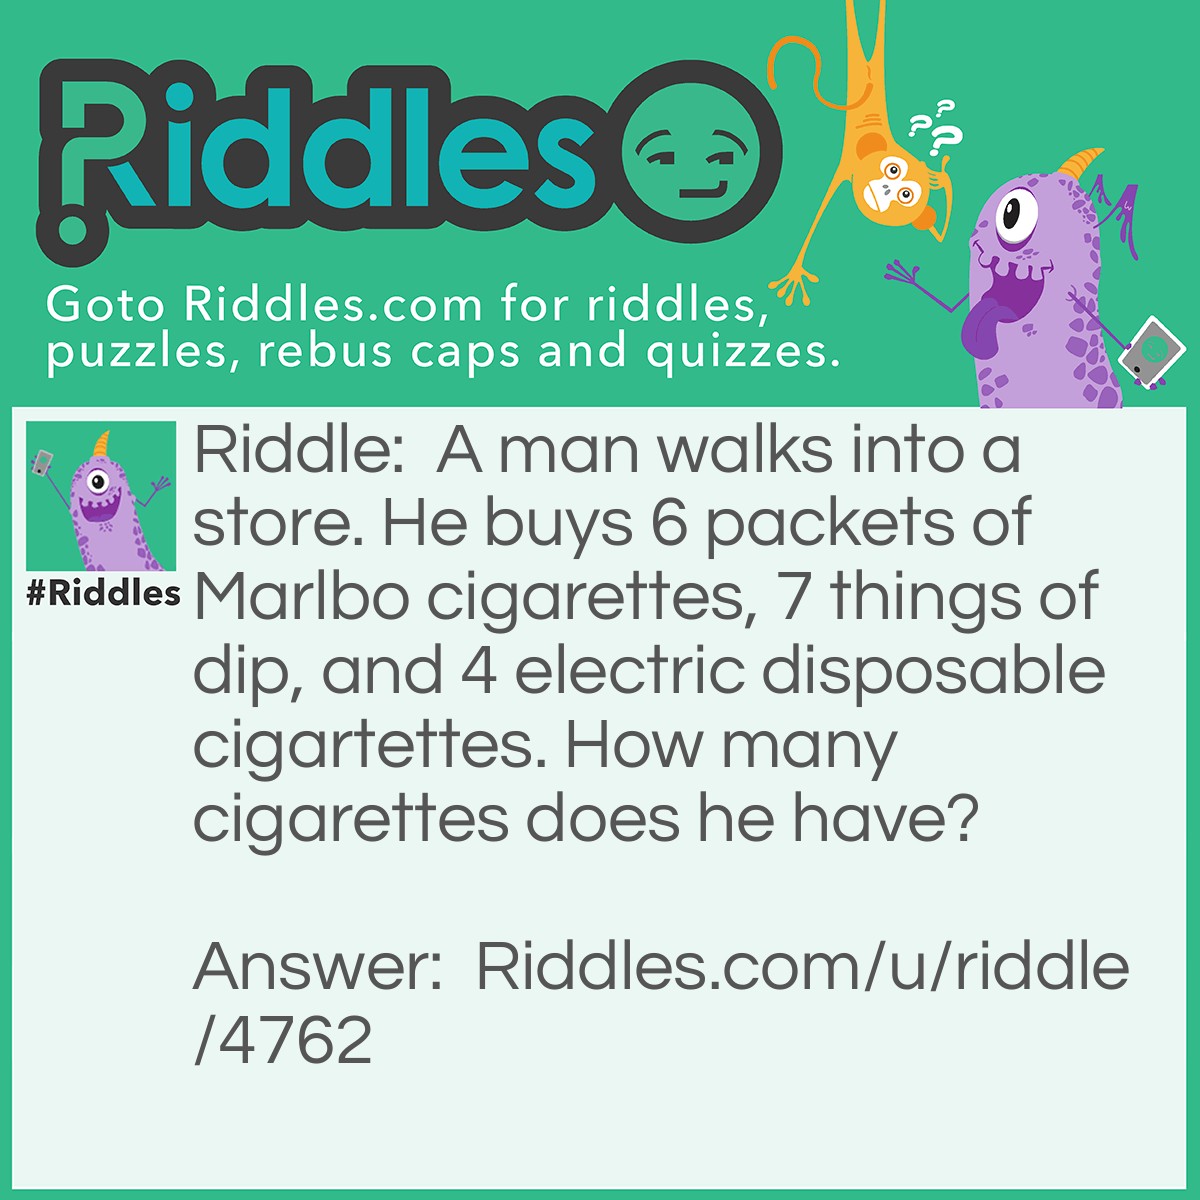 Riddle: A man walks into a store. He buys 6 packets of Marlbo cigarettes, 7 things of dip, and 4 electric disposable cigartettes. How many cigarettes does he have? Answer: 126. Because there are 21 cigarettes in each Marlbo packet. The riddle said CIGARETTES not DIP or ELECTRIC DISPOSABLE CIGARETTES. 12 × 6 = 126.